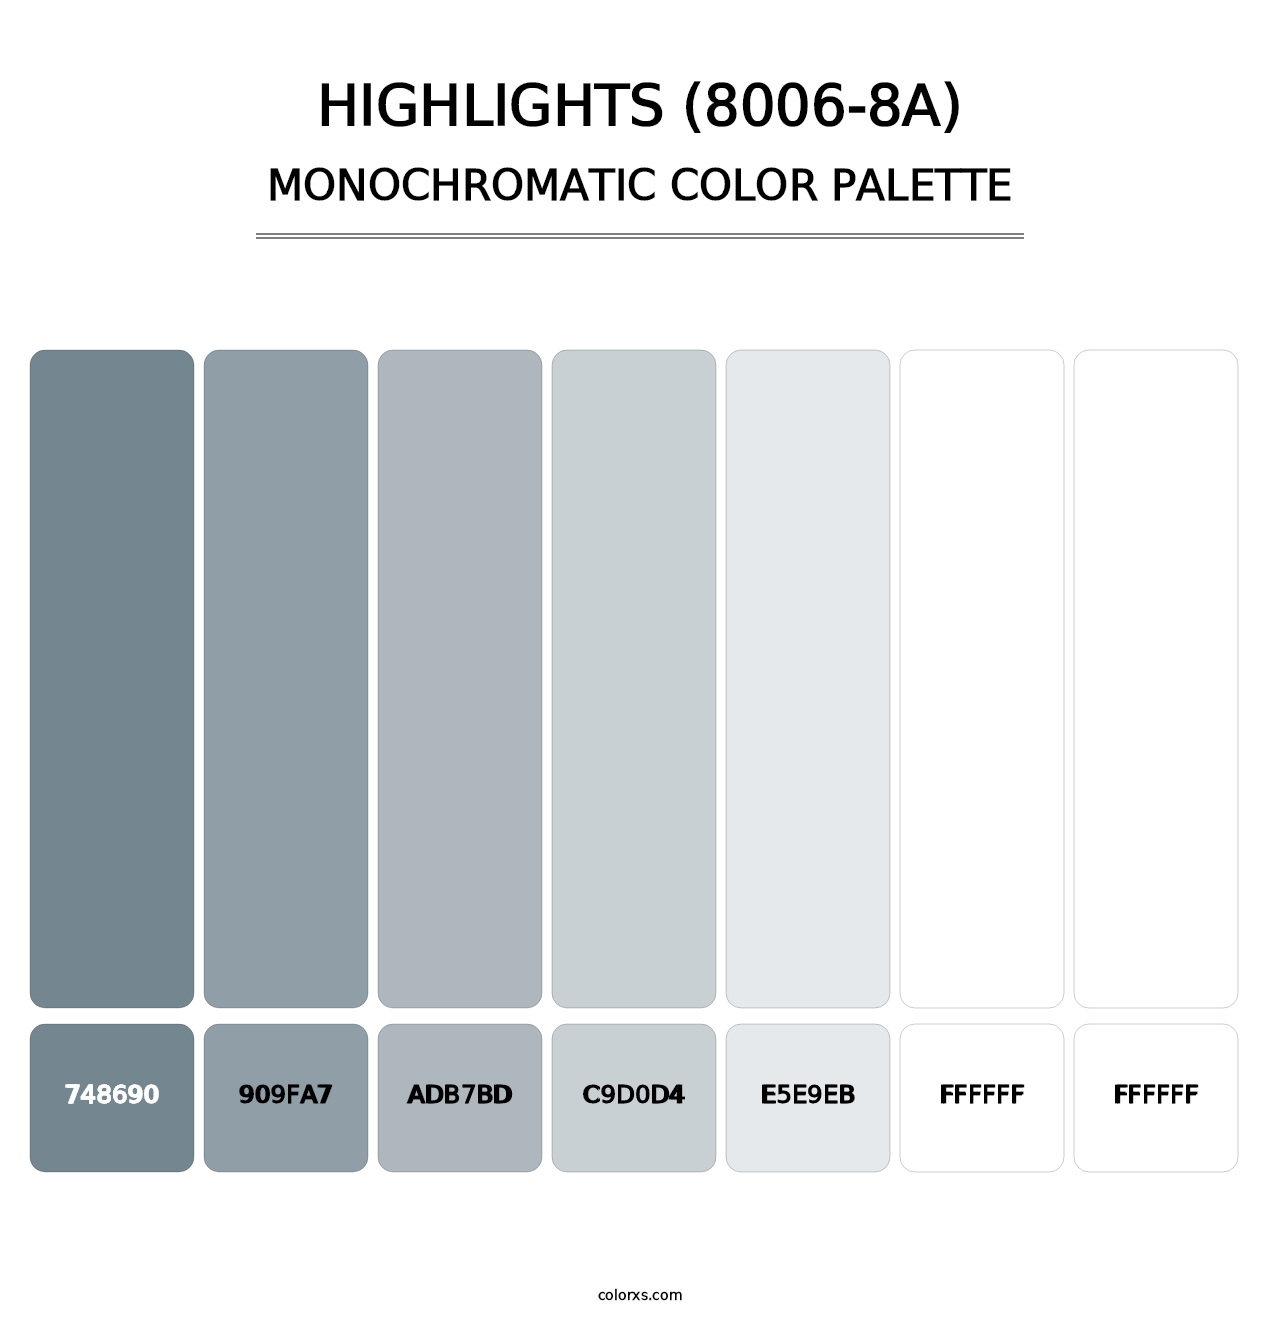 Highlights (8006-8A) - Monochromatic Color Palette